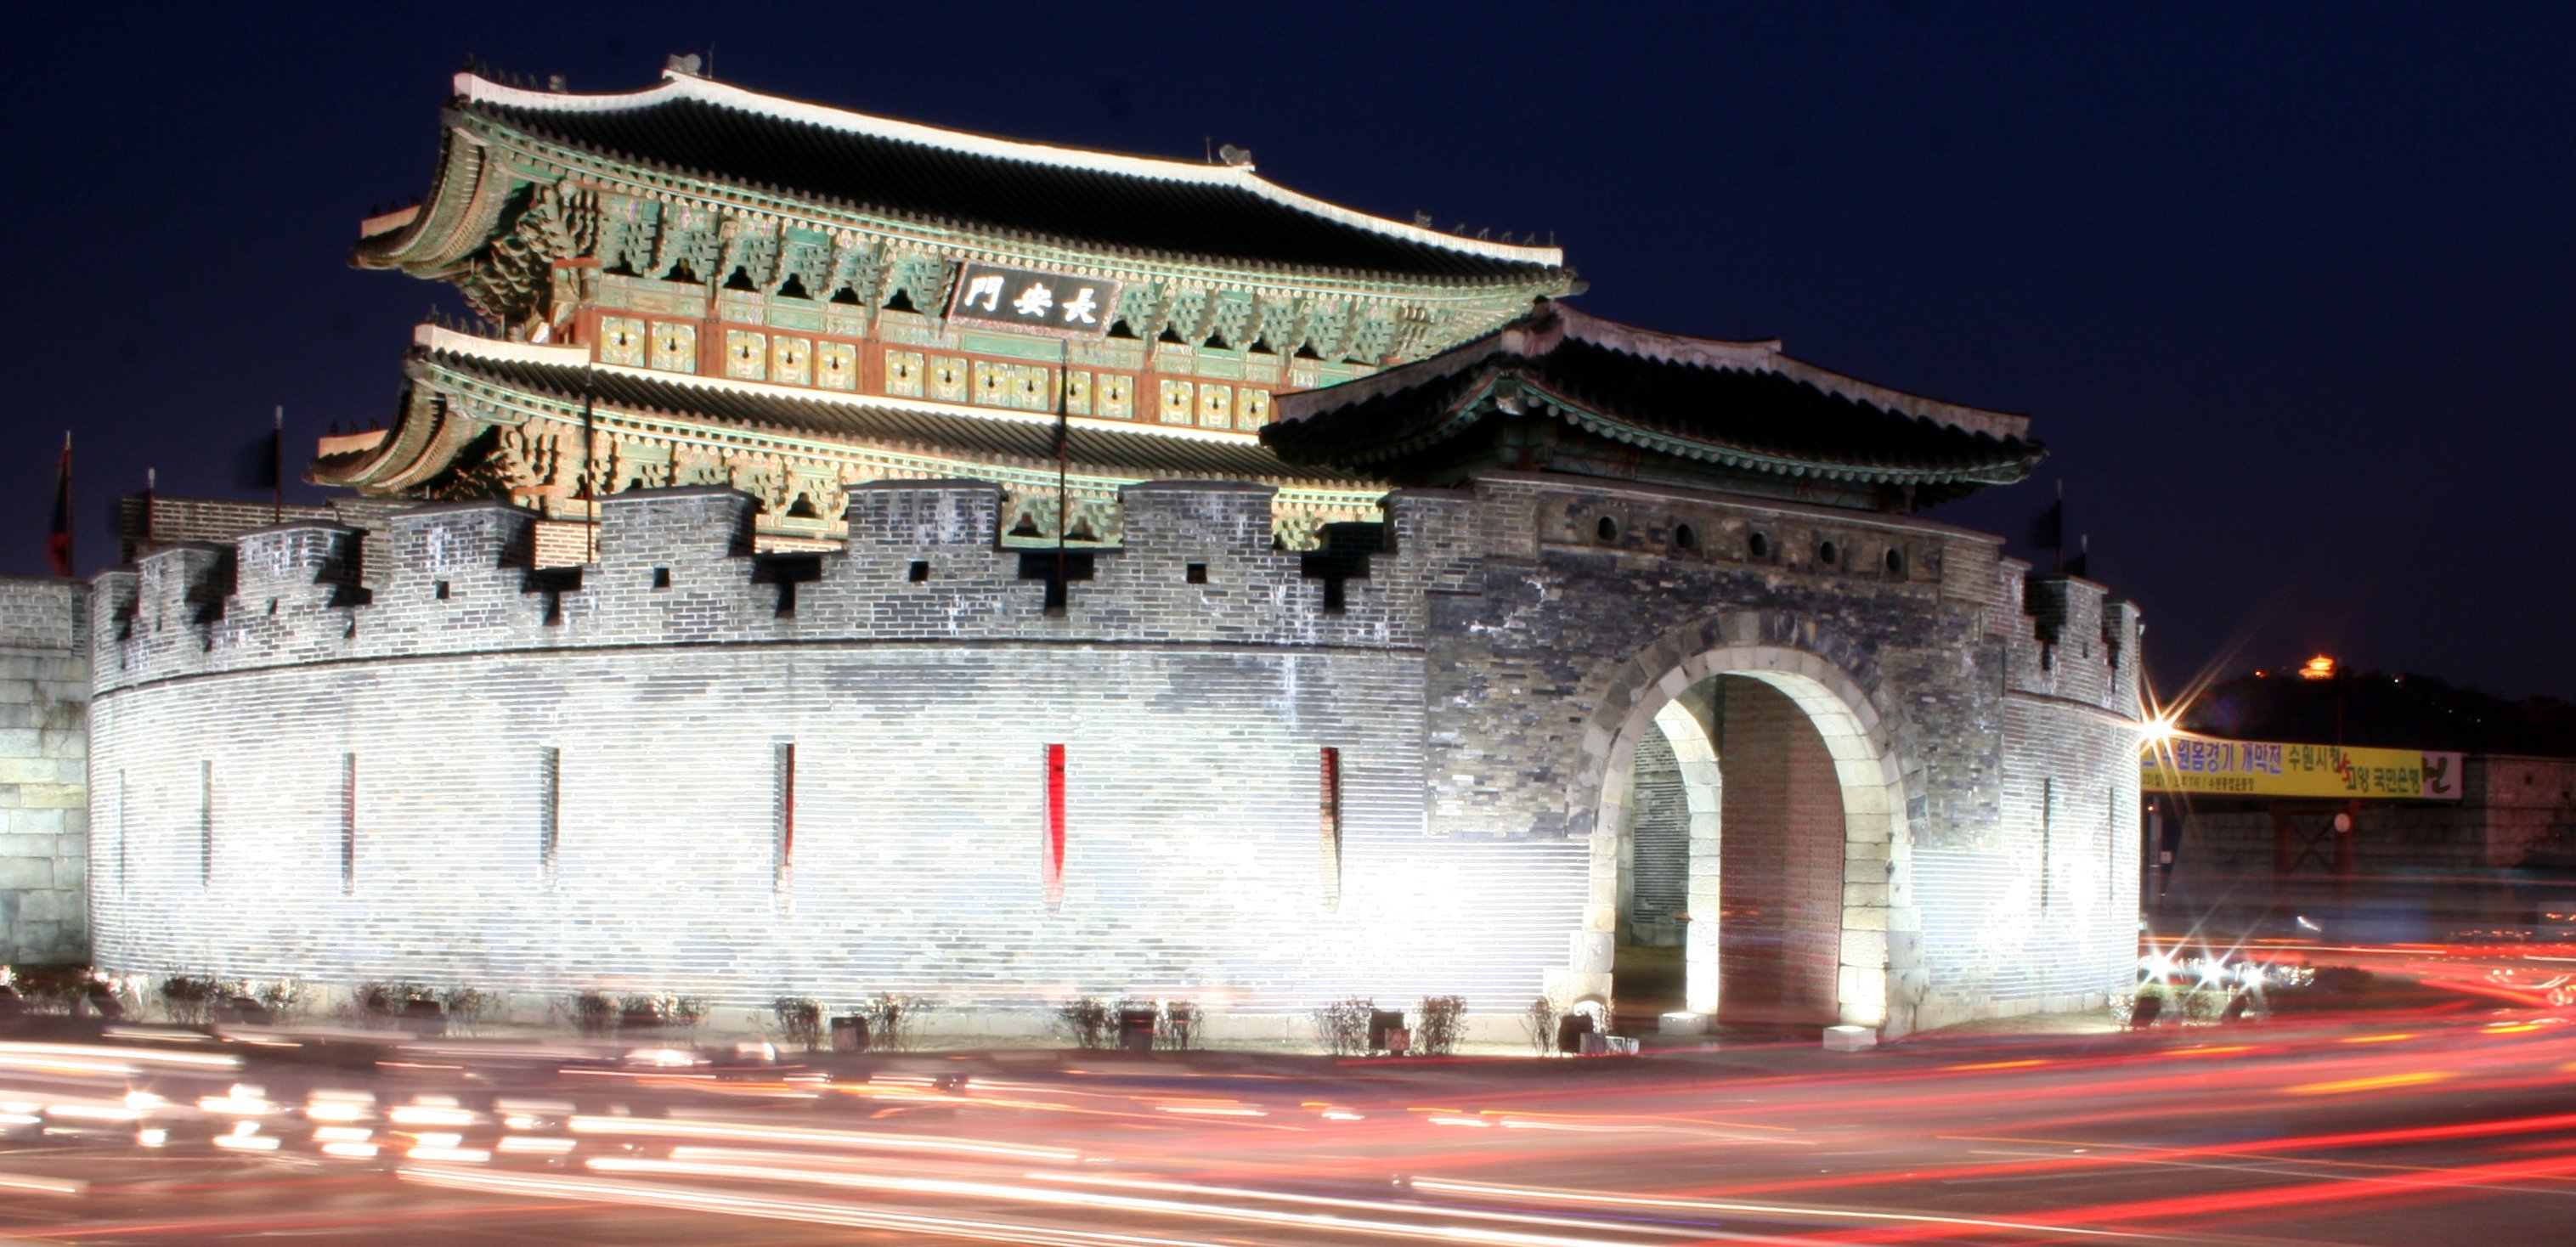 The Walled City Of Suwon